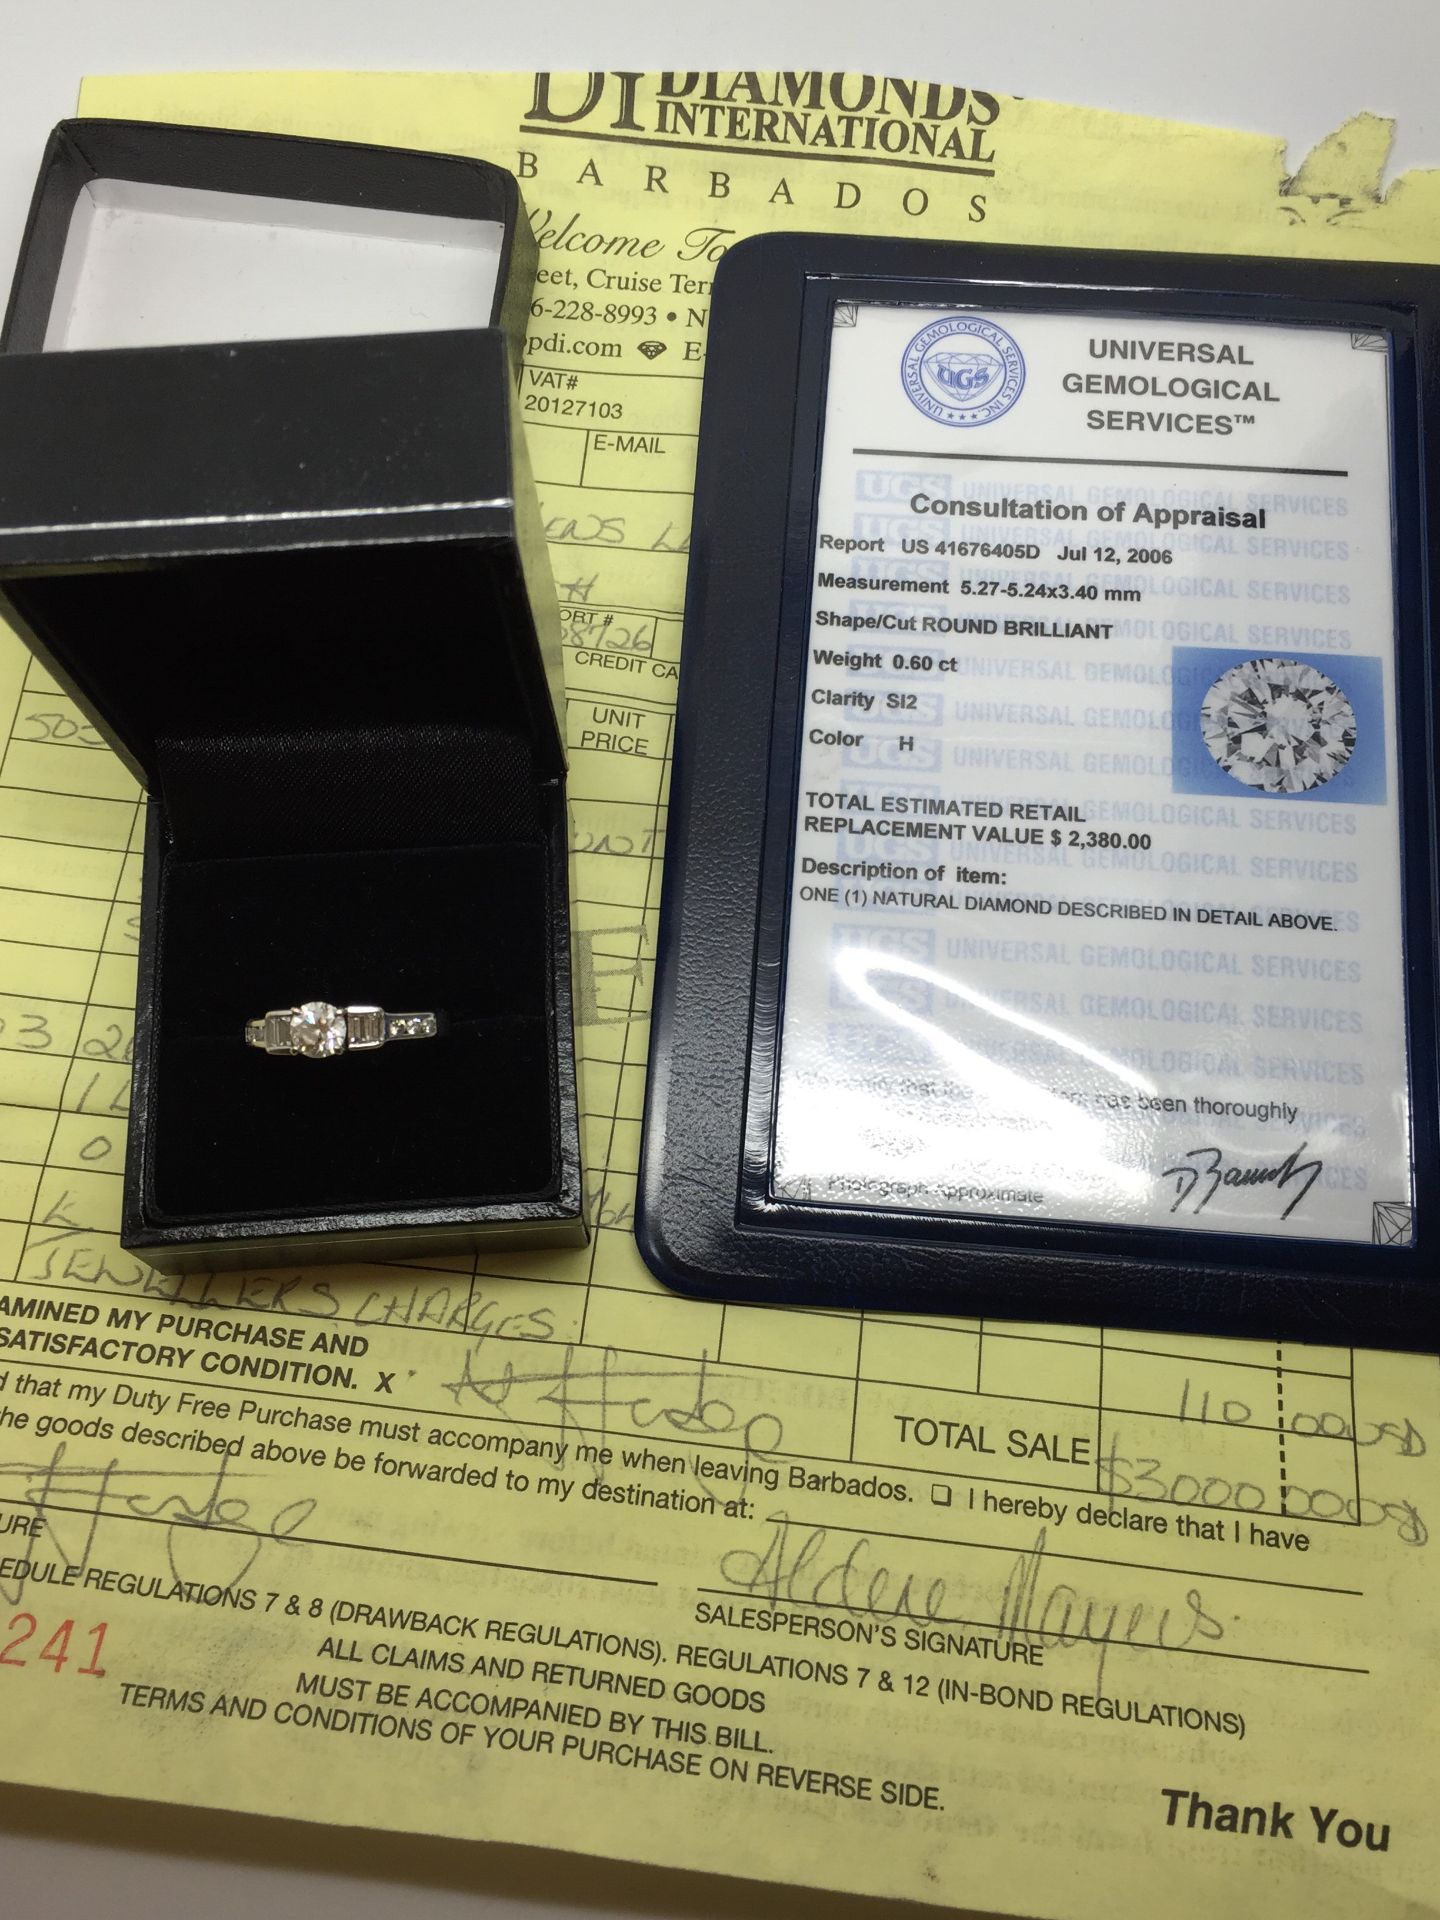 18ct WHITE GOLD DIAMOND RING 1.02ct  COST $3000 IN 2007 IN BAHAMAS - RECEIPT INCLUDED - Image 5 of 5